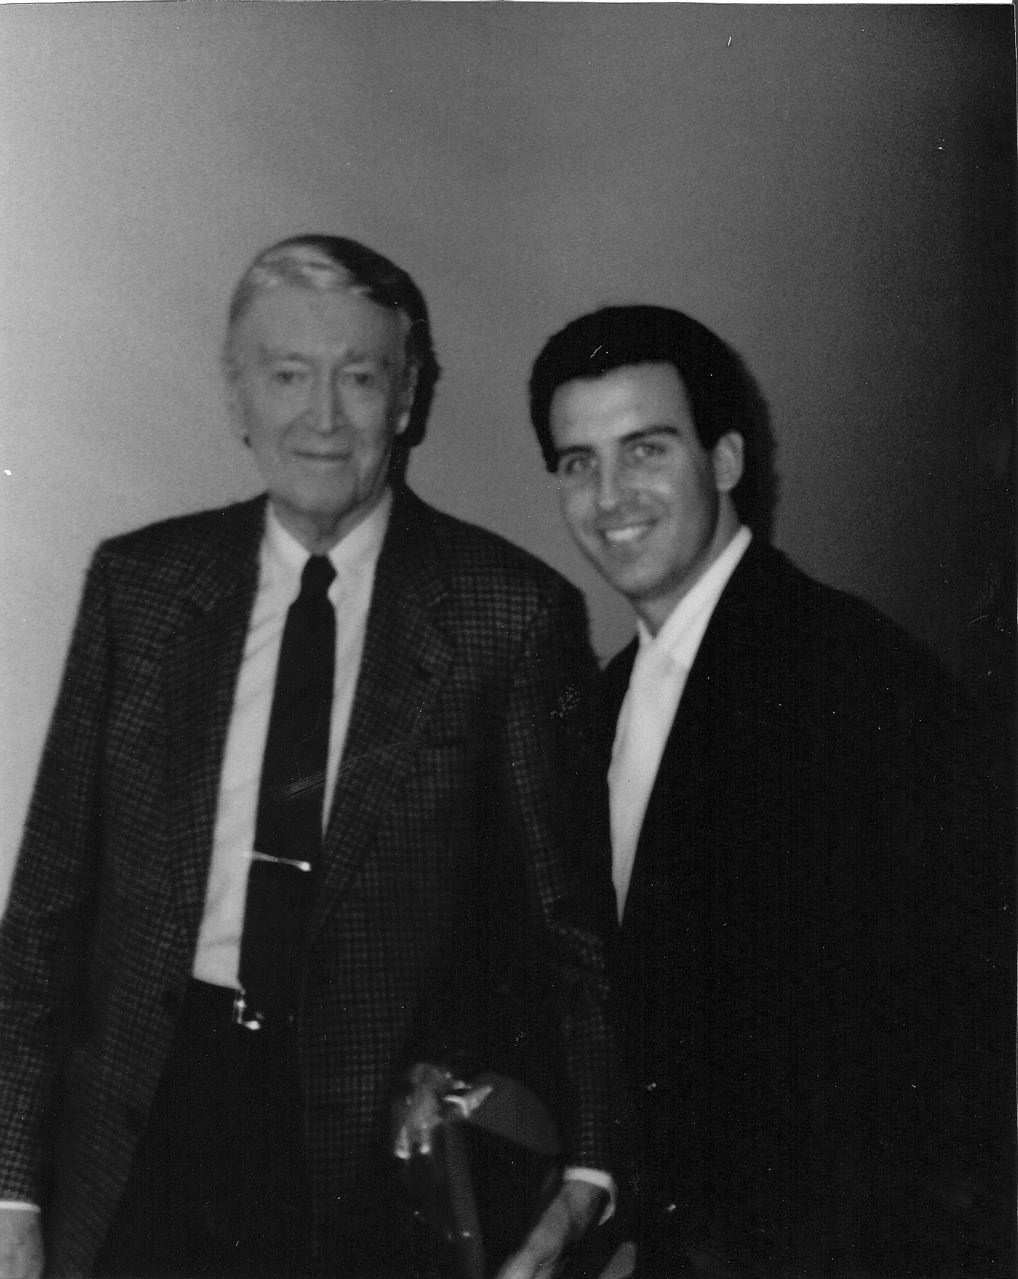 Jimmy Stewart and Mark Fauser